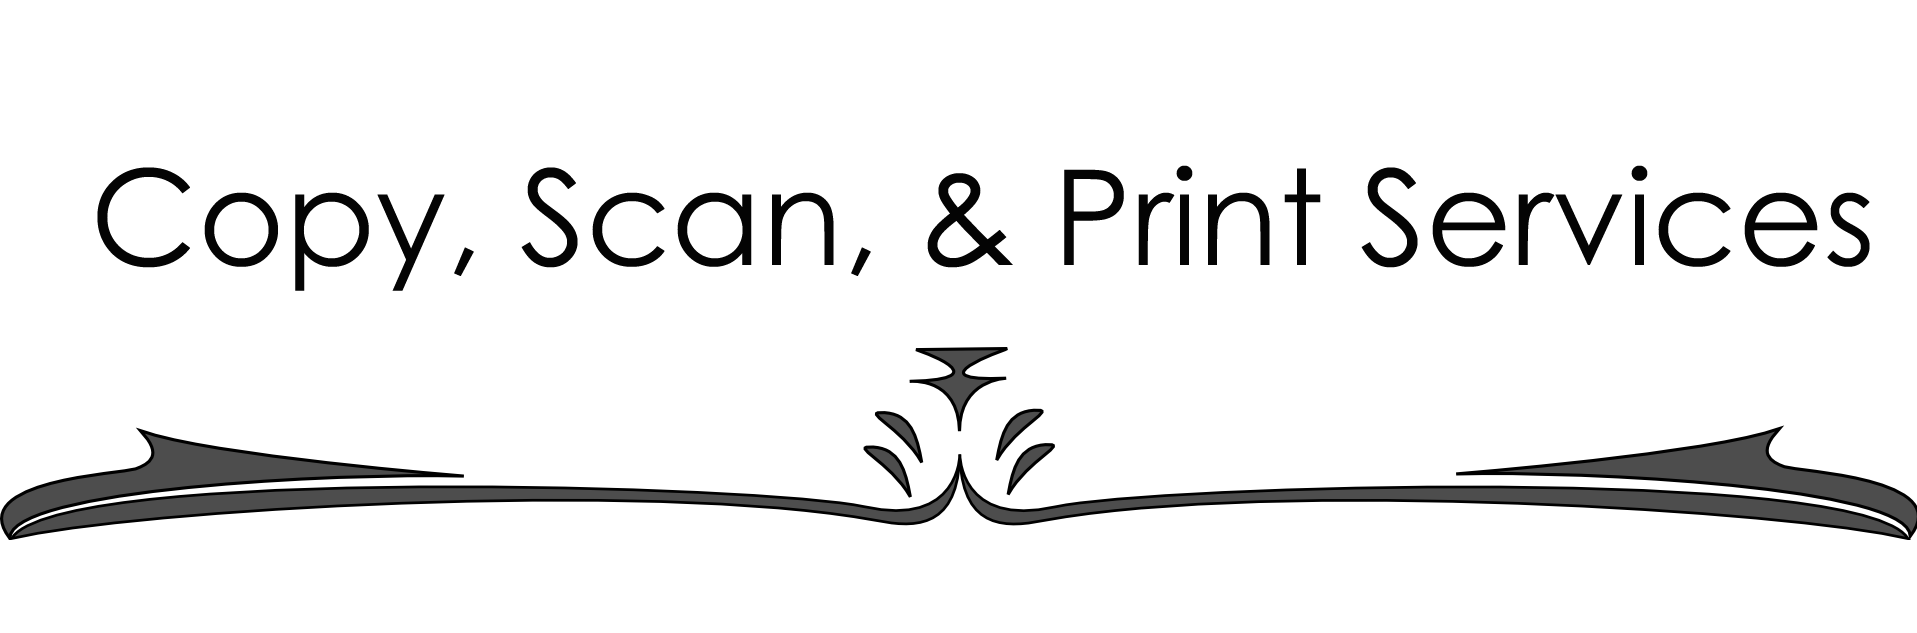 copy, scan, and print title banner black and white